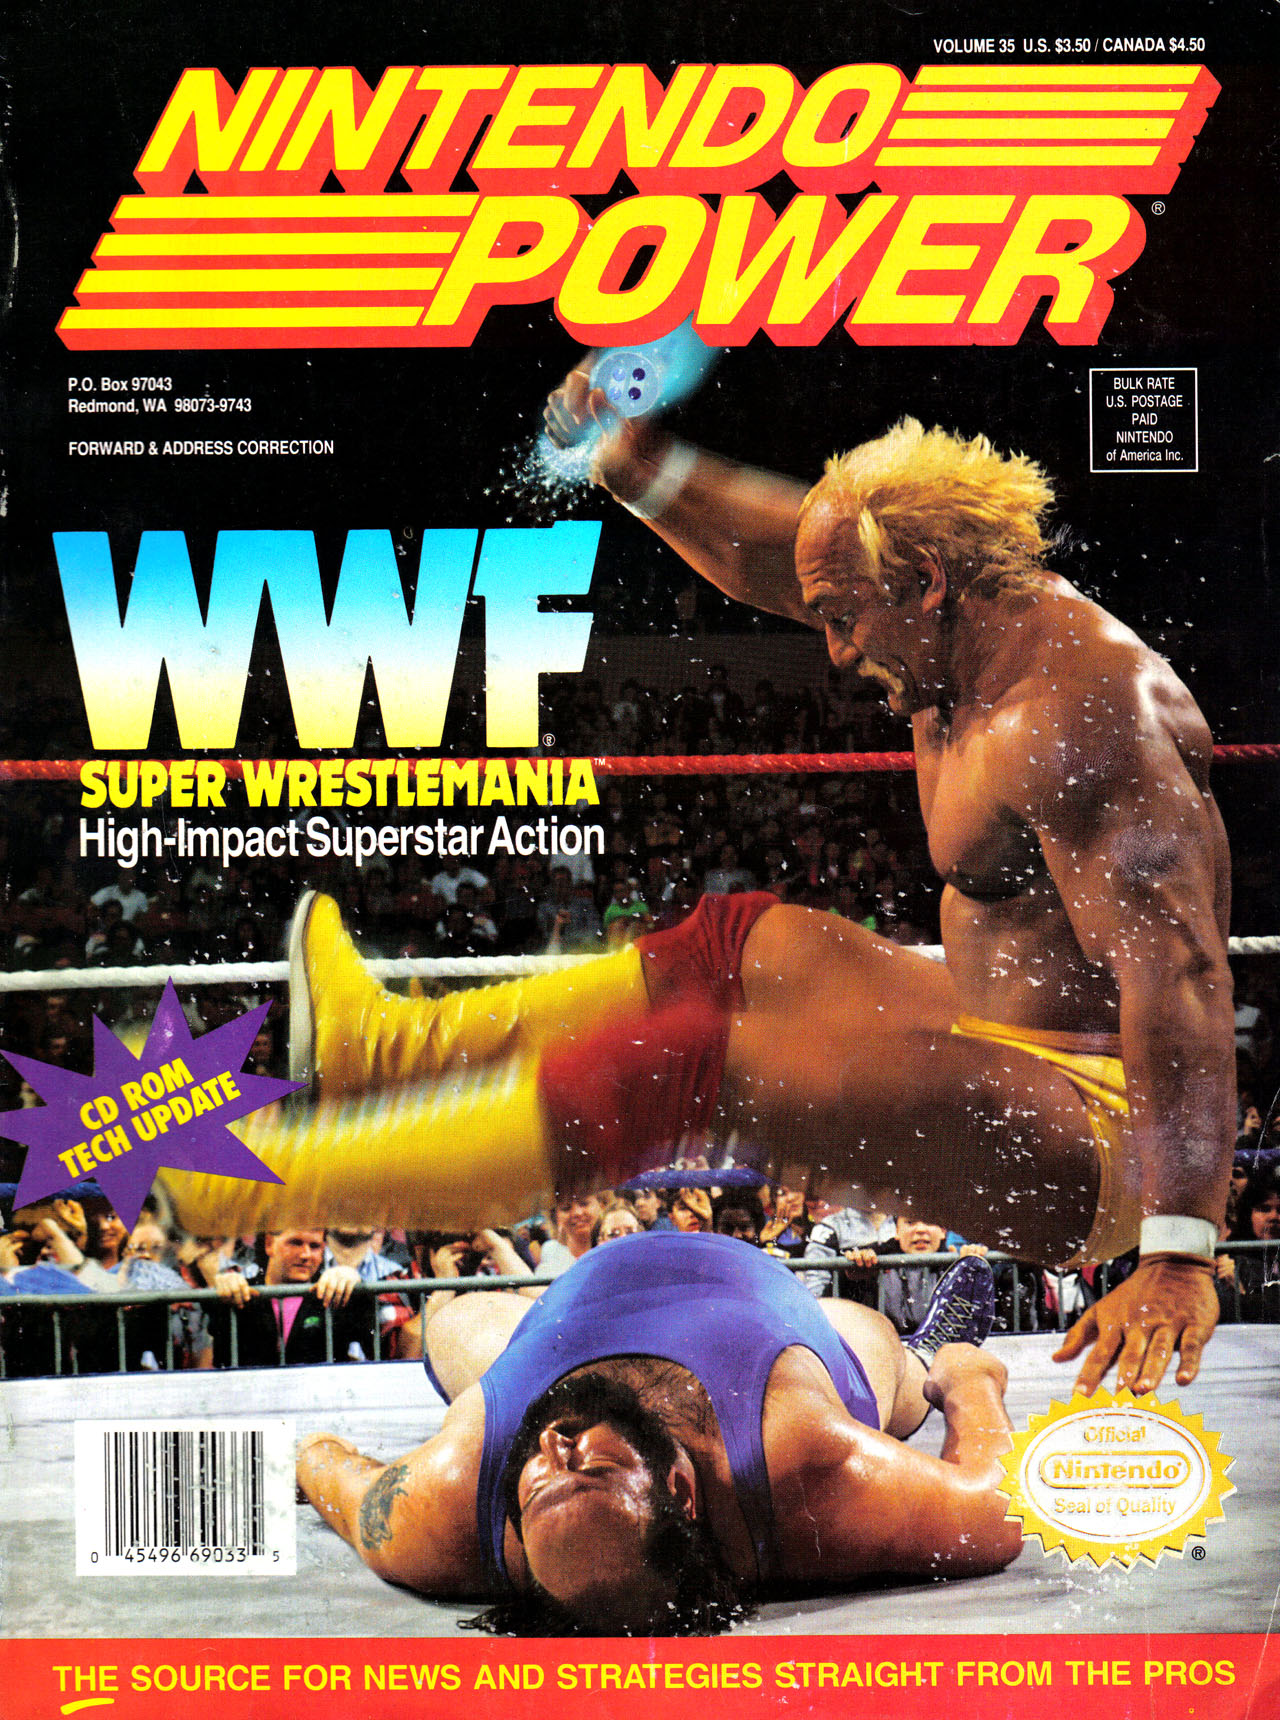 Nintendo Power Issue 35 | Read Nintendo Power Issue 35 comic online in high  quality. Read Full Comic online for free - Read comics online in high  quality .| READ COMIC ONLINE